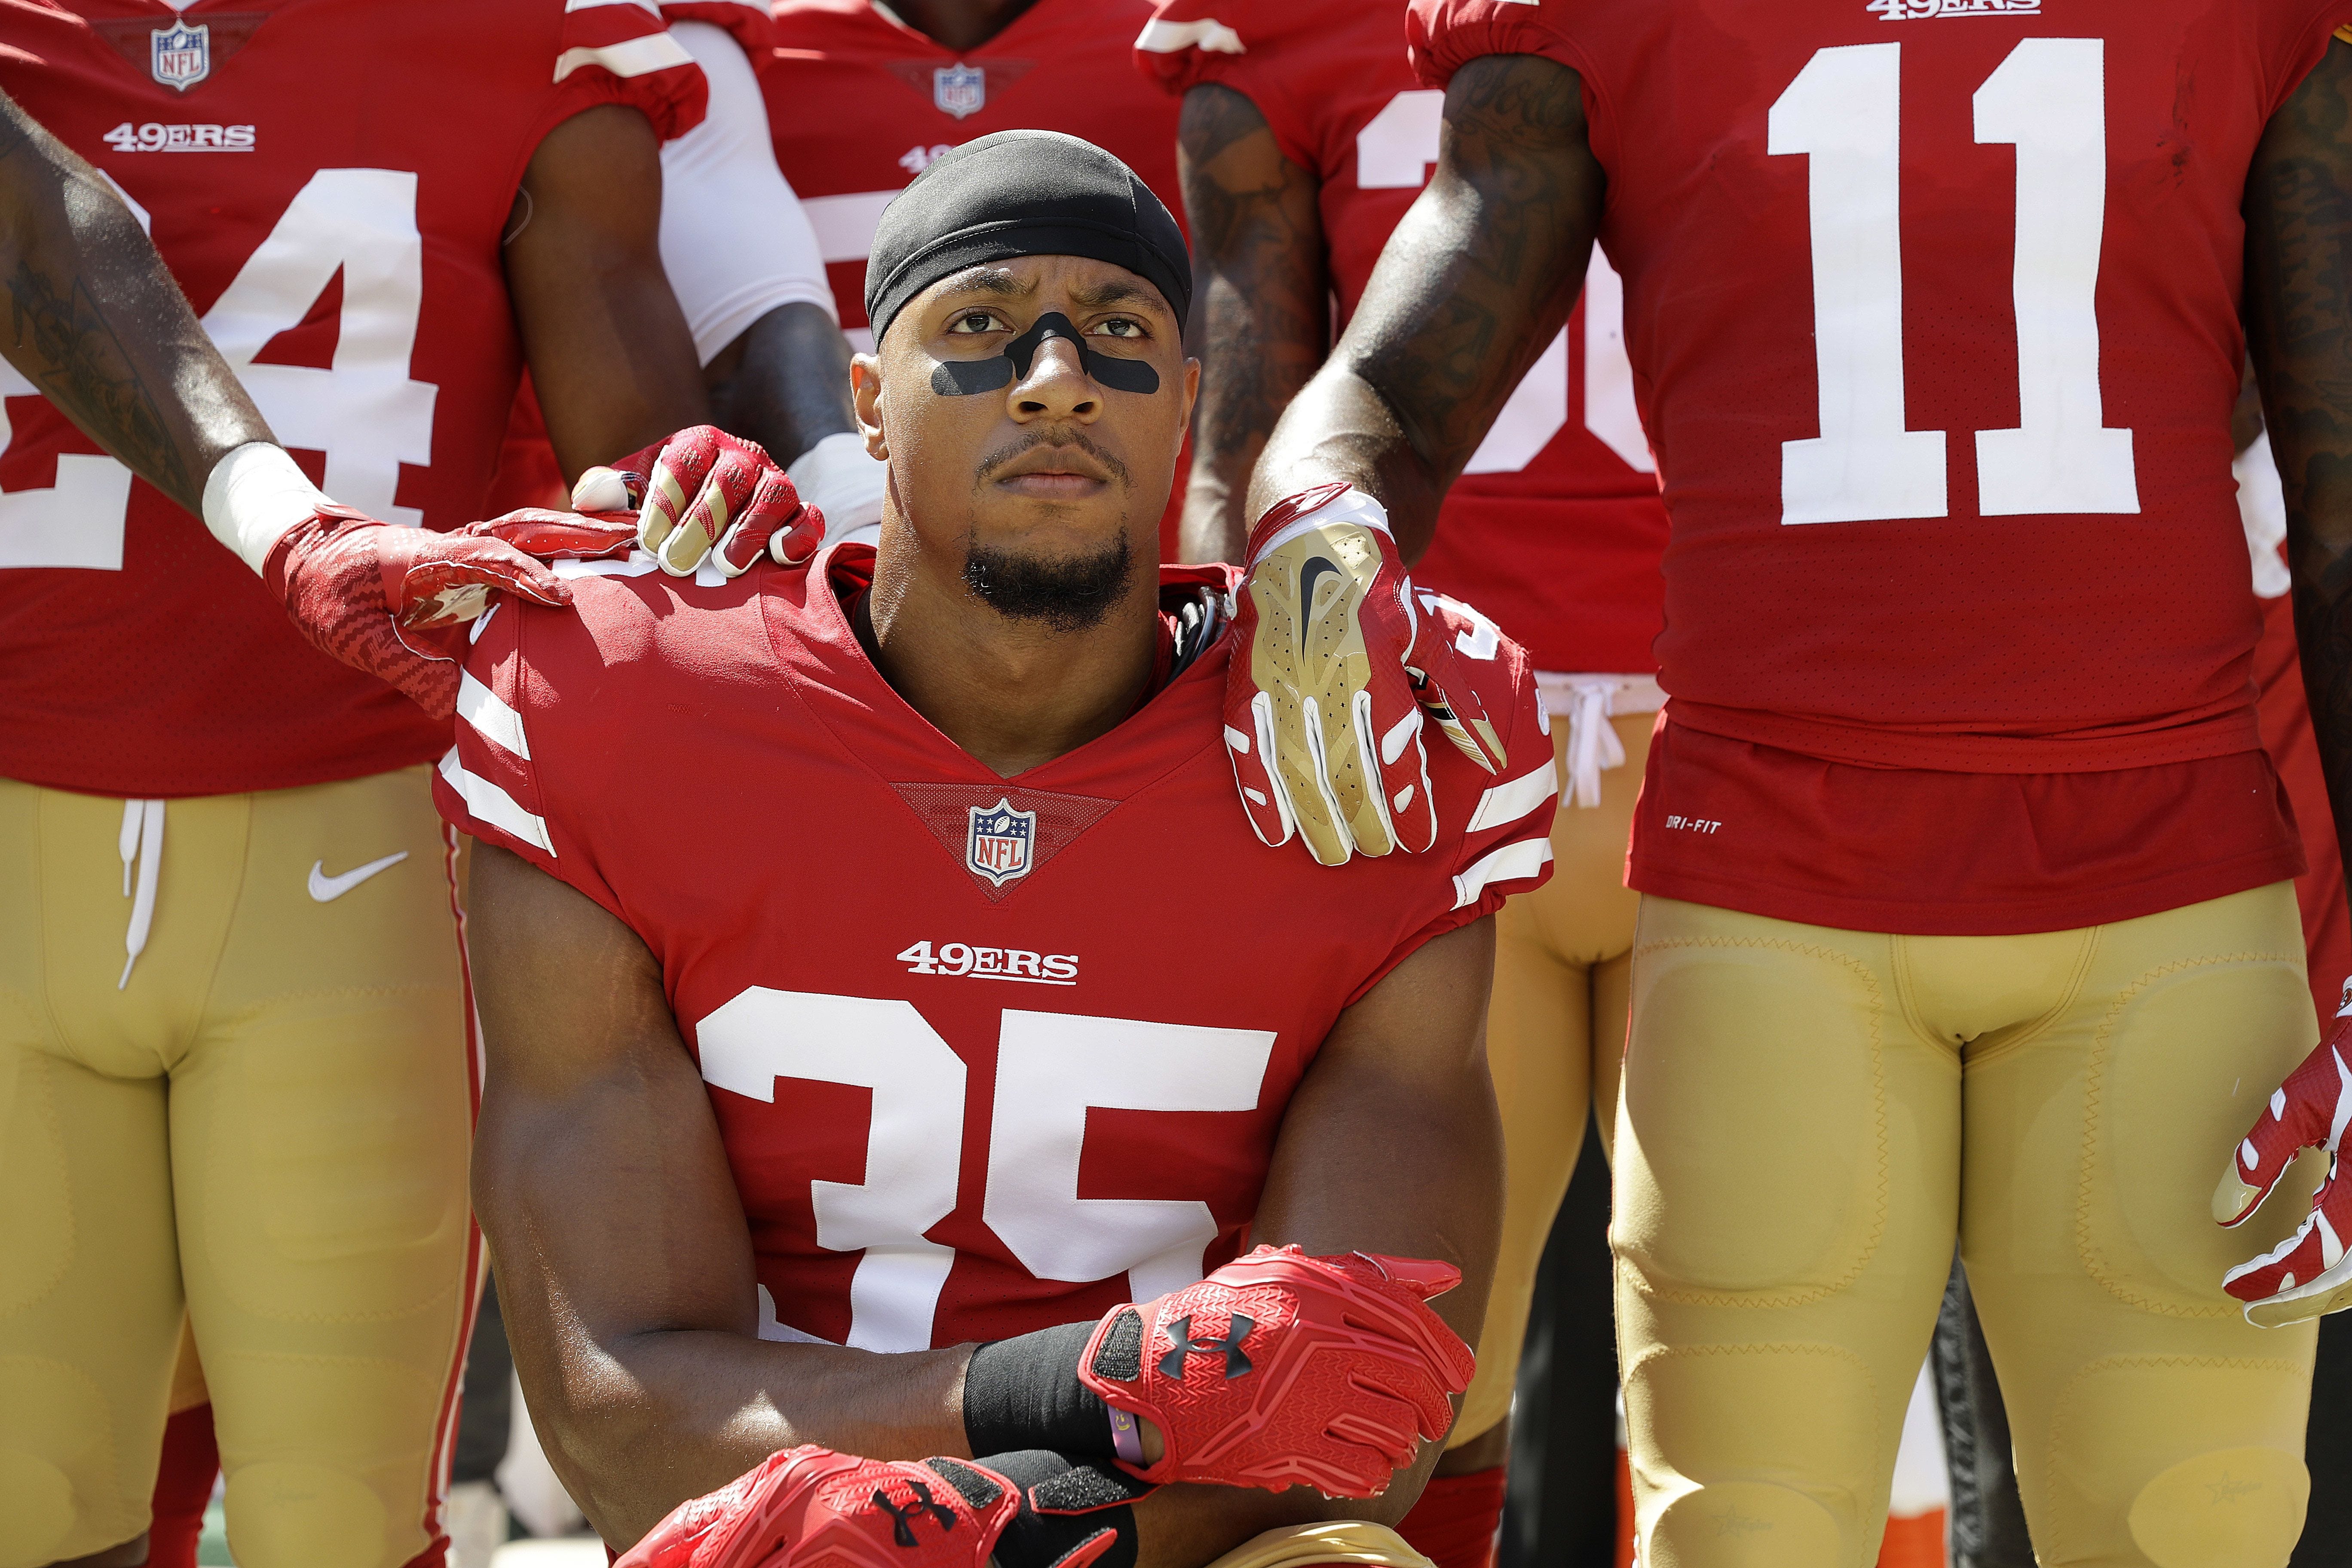 49ers' Eric Reid on Mike Pence's walkout: 'This is what systemic oppression looks like'